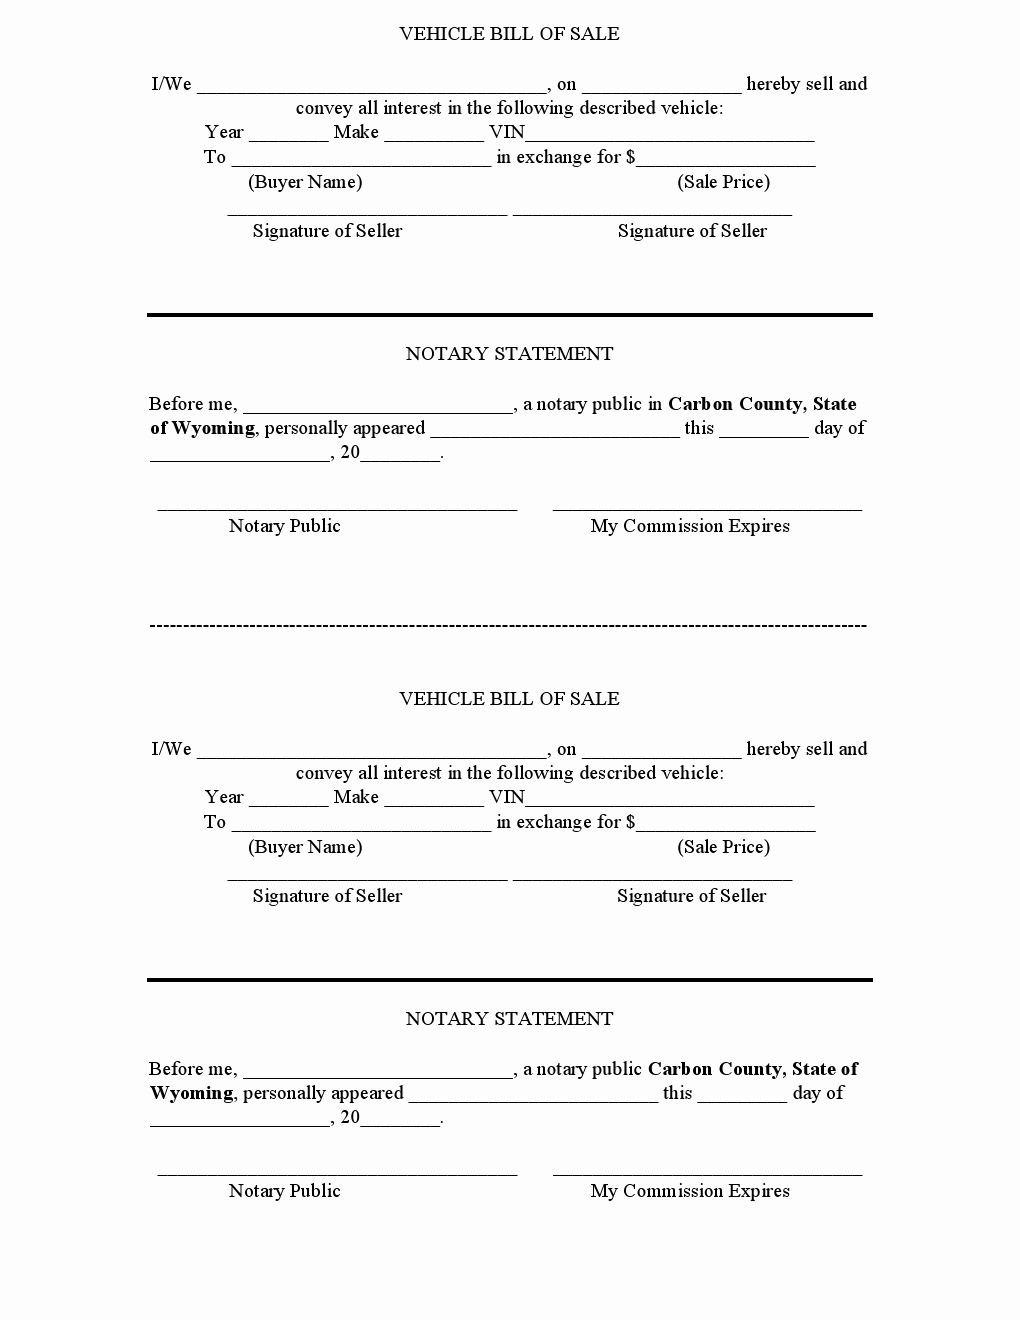 Georgia Automobile Bill Of Sale New Free Carbon Country Vehicle Bill Of Sale form Download